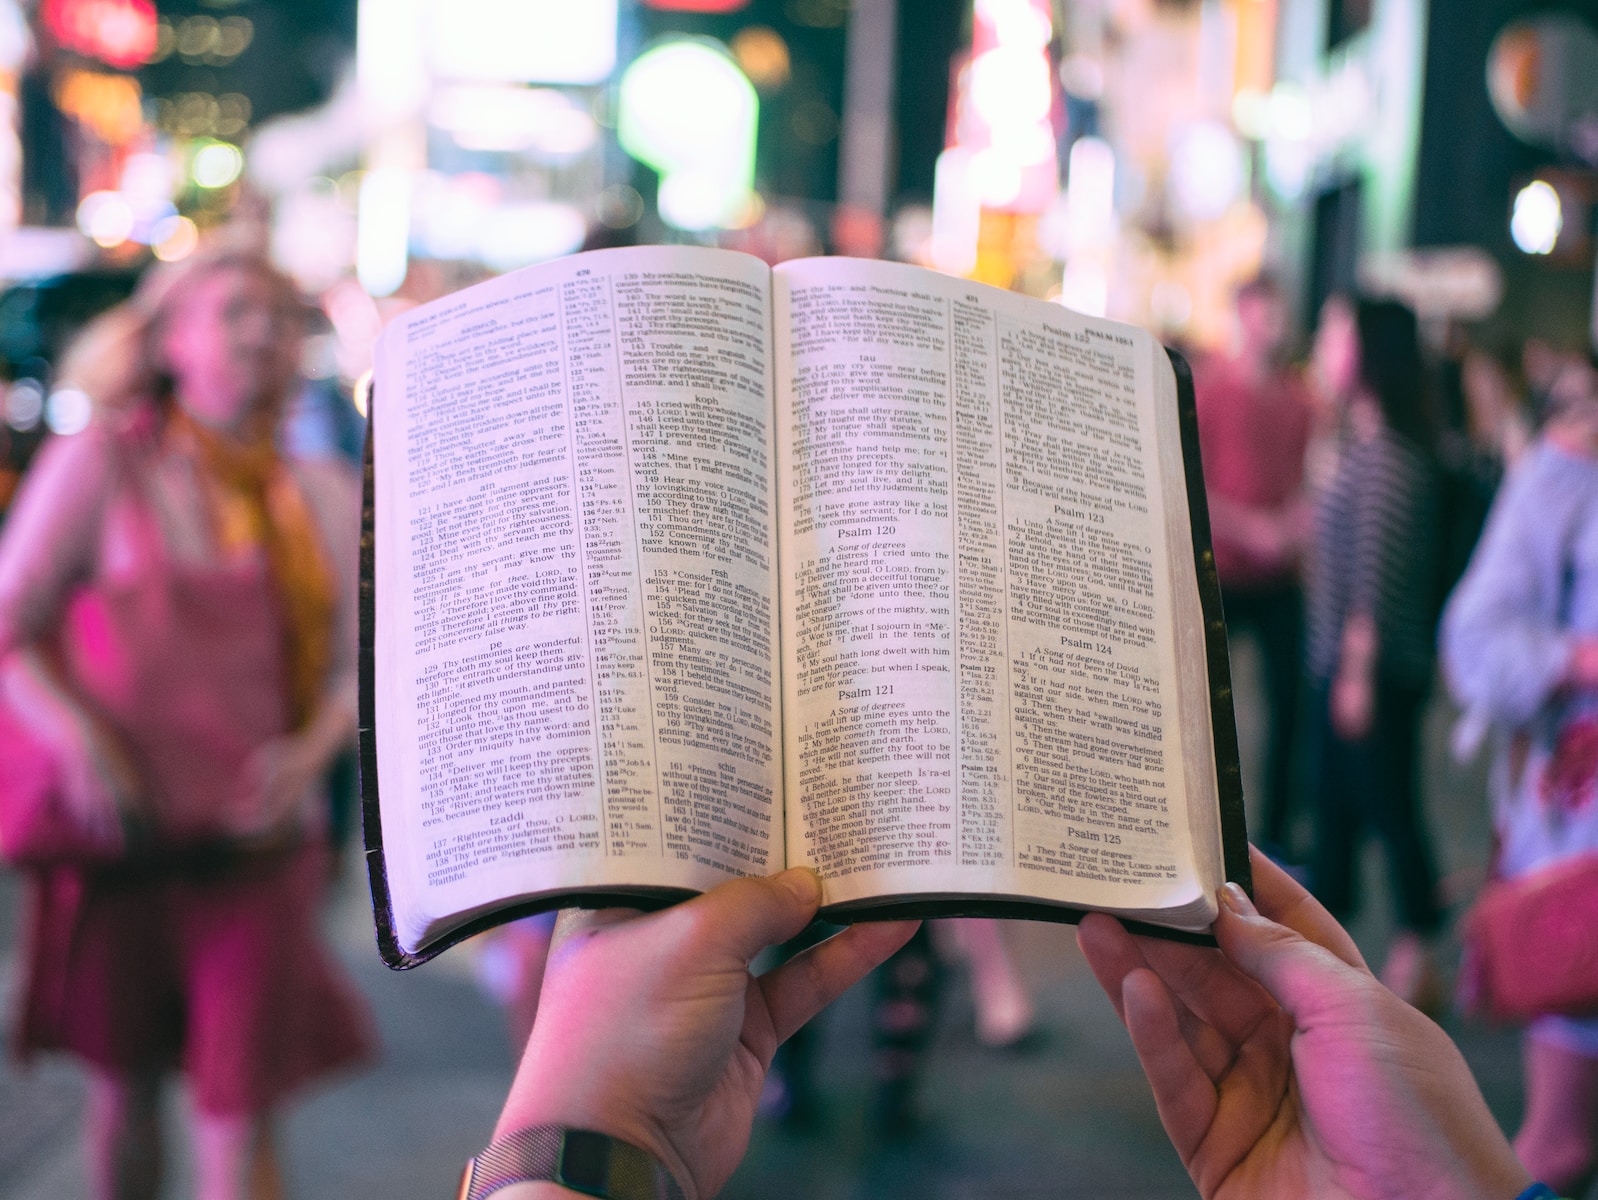 person holding bible on road with people walking on sidewalk beside buildings during nighttime